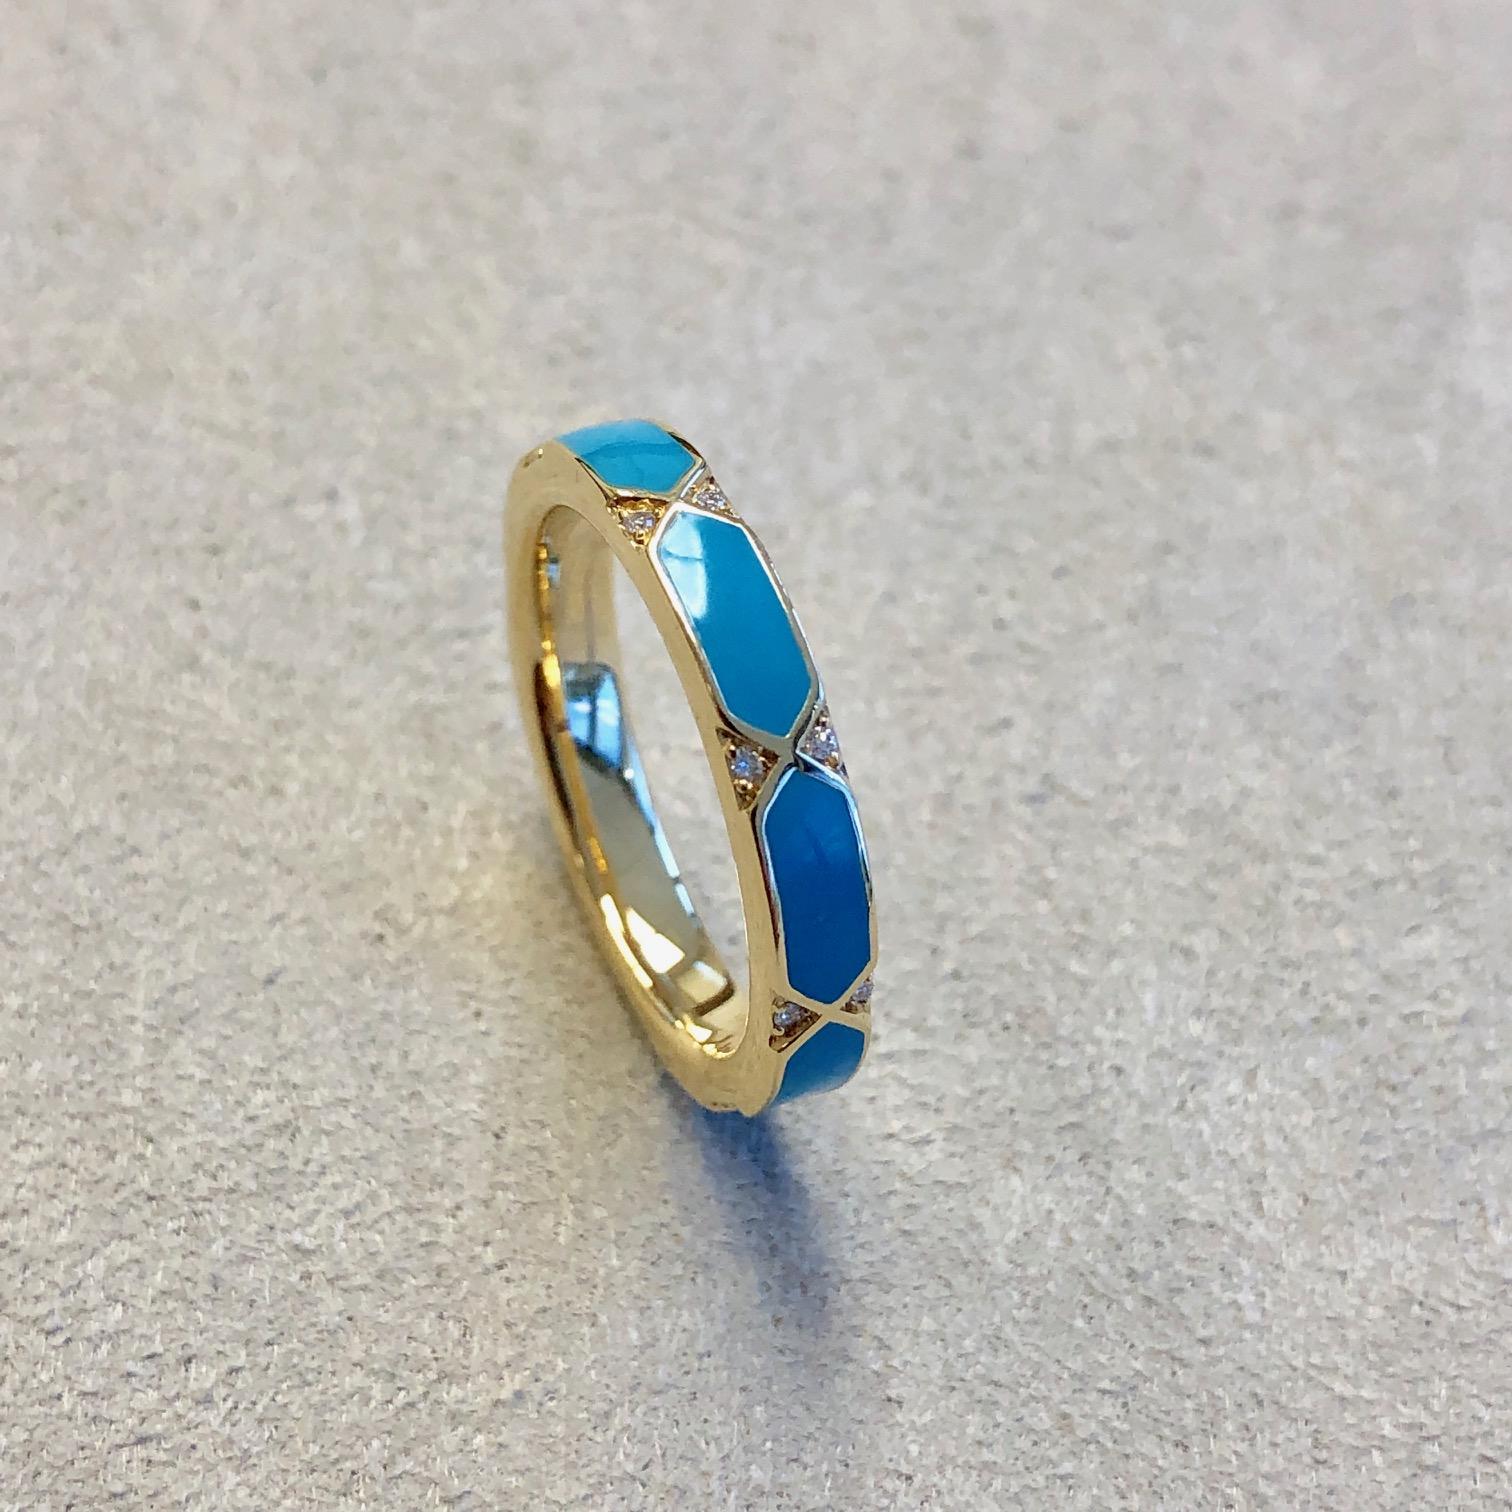 Created in 18 karat yellow gold
Turquoise blue enamel 
Diamonds 0.06 ct approx
Can be stacked with other colors. Other colors available are black and white
Ring size US 6.5, Can be made in other ring sizes on special order